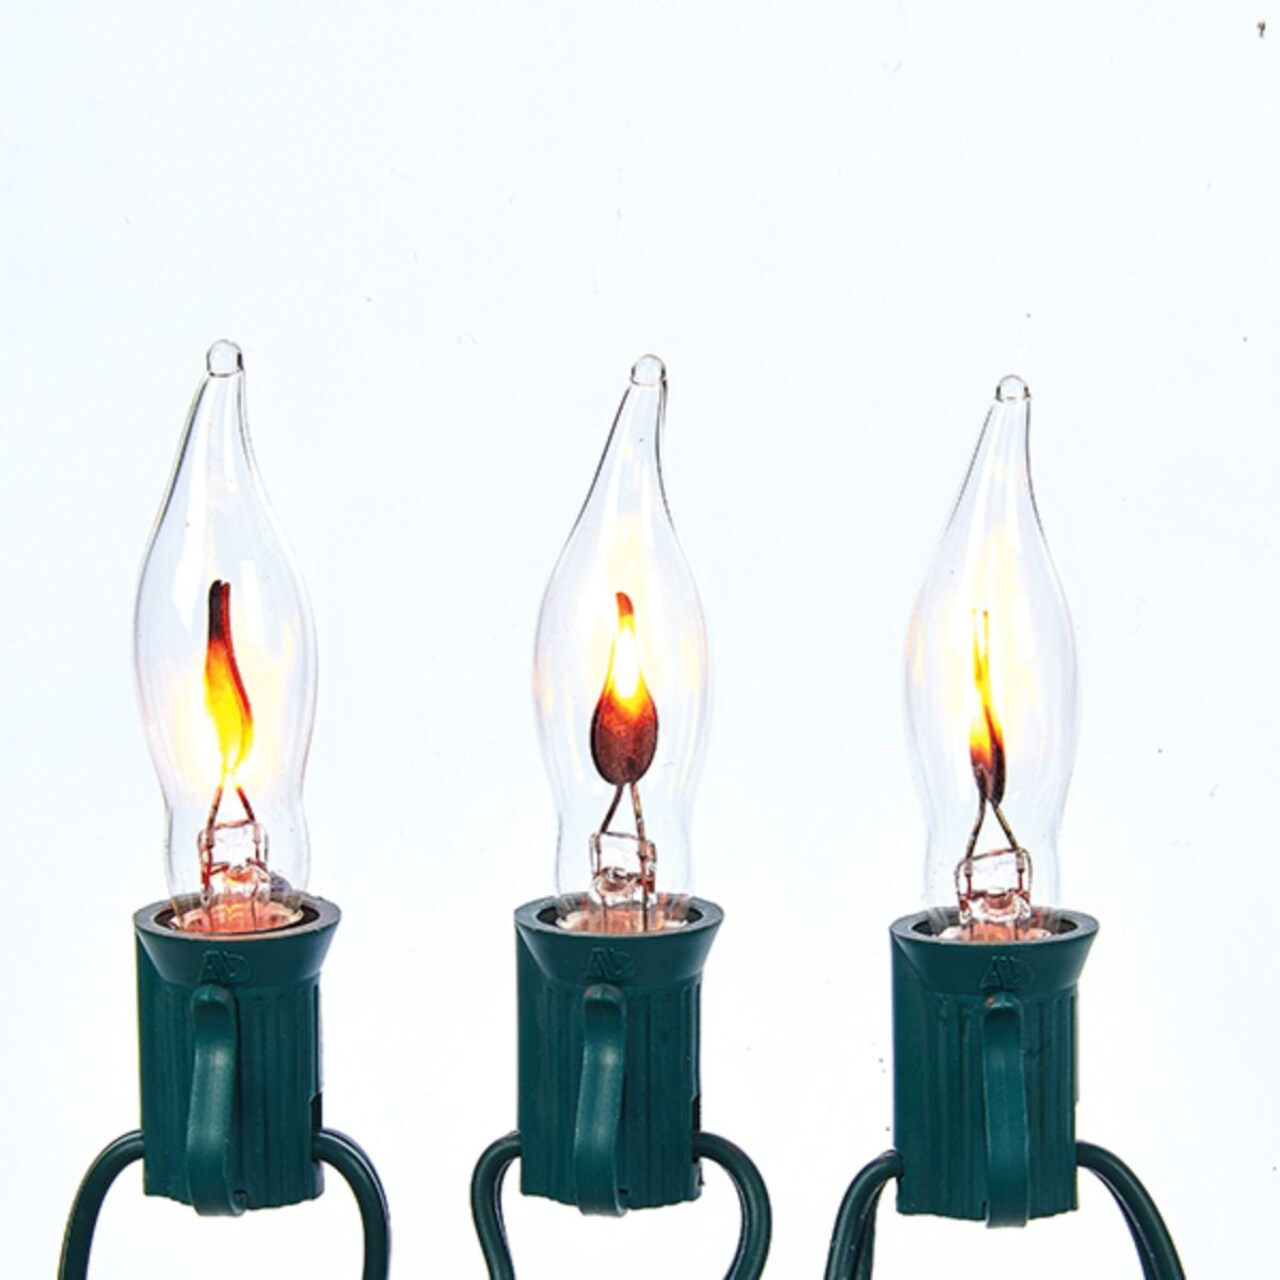 KSA Set of 10 Flicker Candle Flame Novelty Christmas Lights - Green Wire